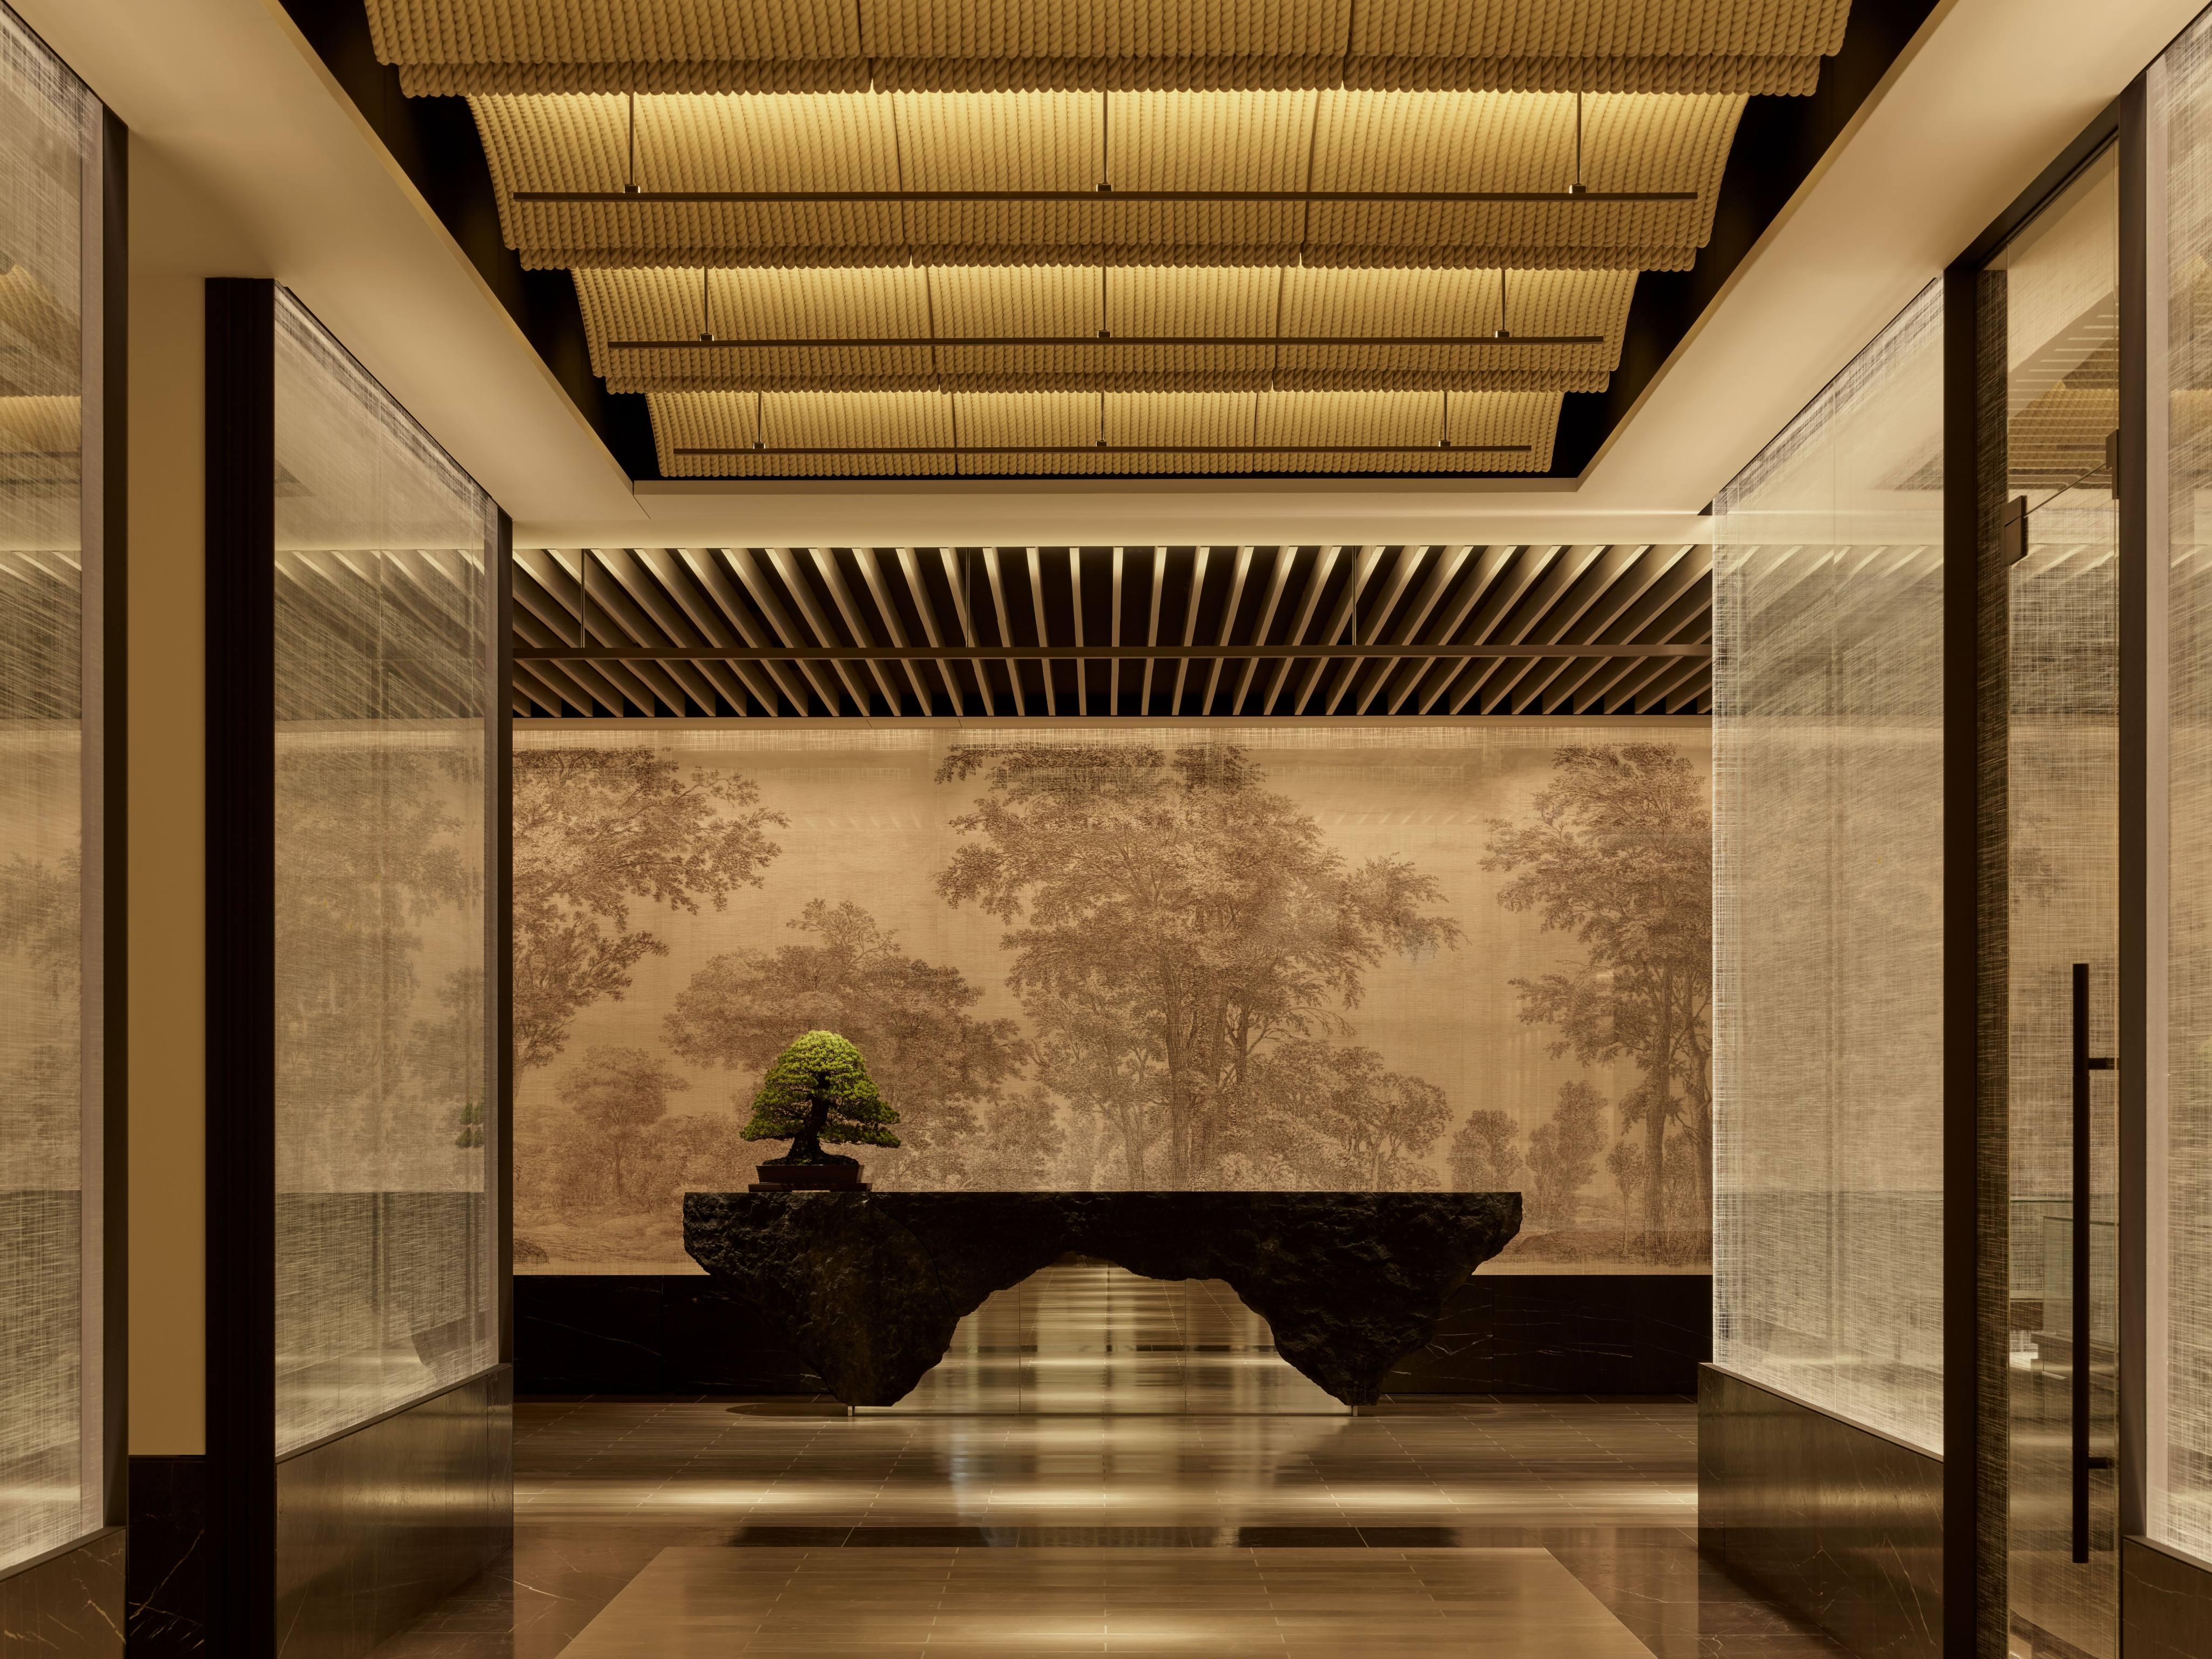 Aman has launched Janu Tokyo, the first hotel under its long-awaited new brand. Photos: Handout